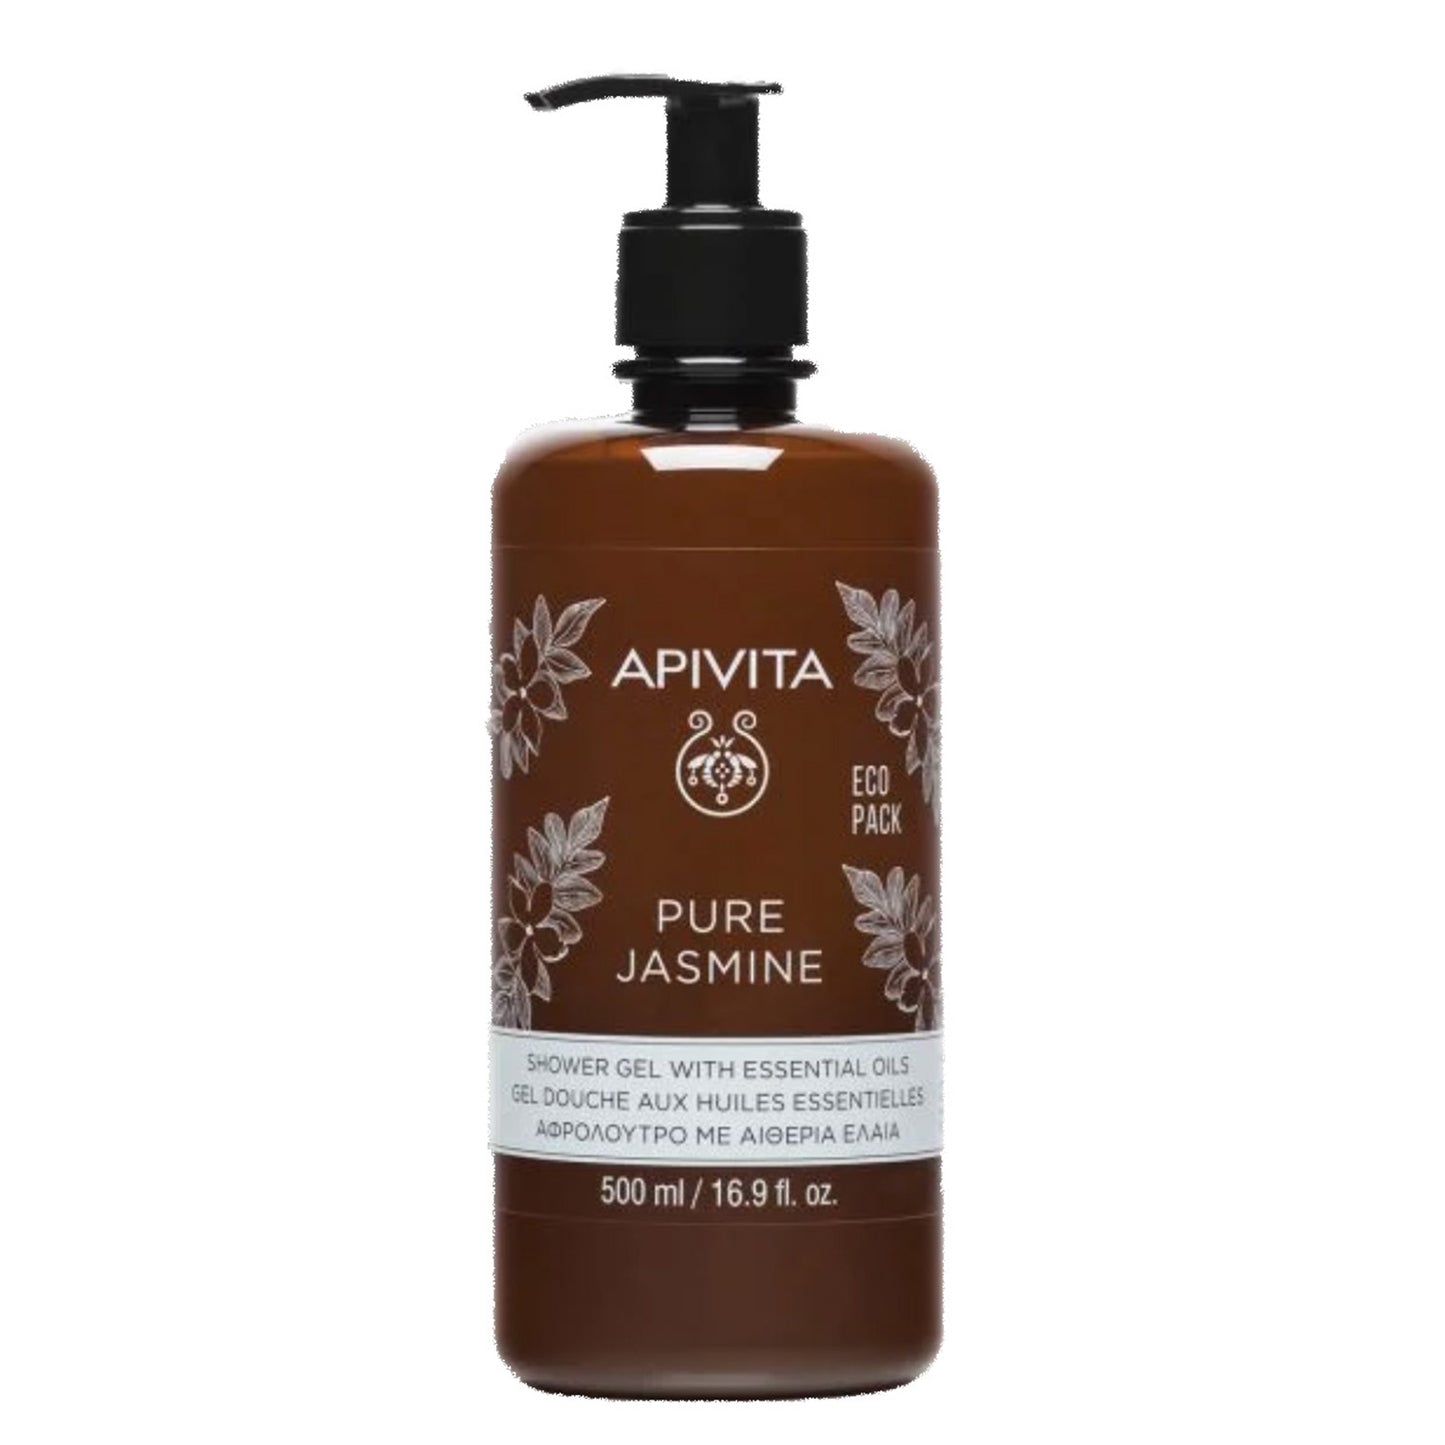 Apivita Pure Jasmin Shower Gel with Essential Oils Ecopack. It cleanses skin gently, preserving natural moisture and providing a luxurious sense of well-being.